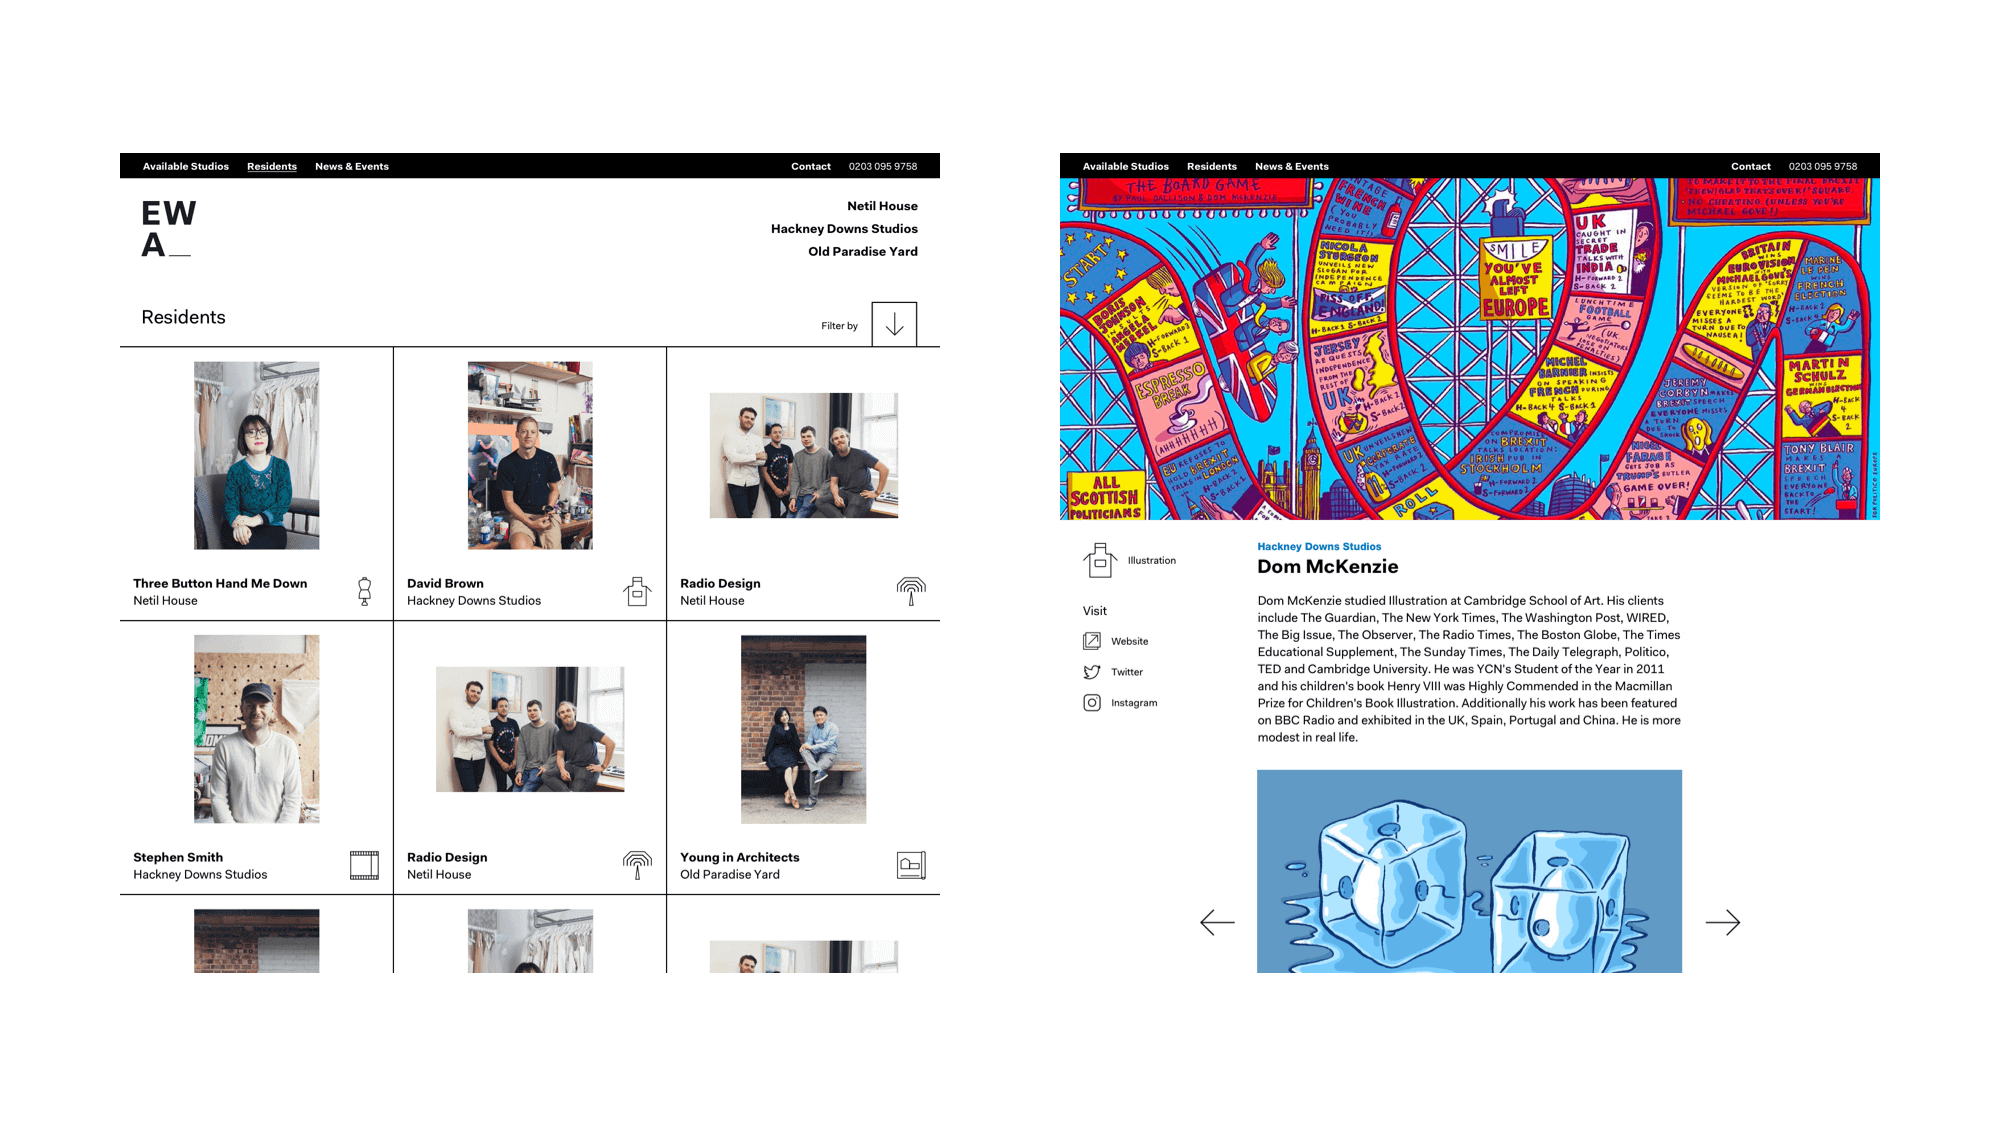 Desktop designs for EatWorkArt's resident listing page and individual resident page